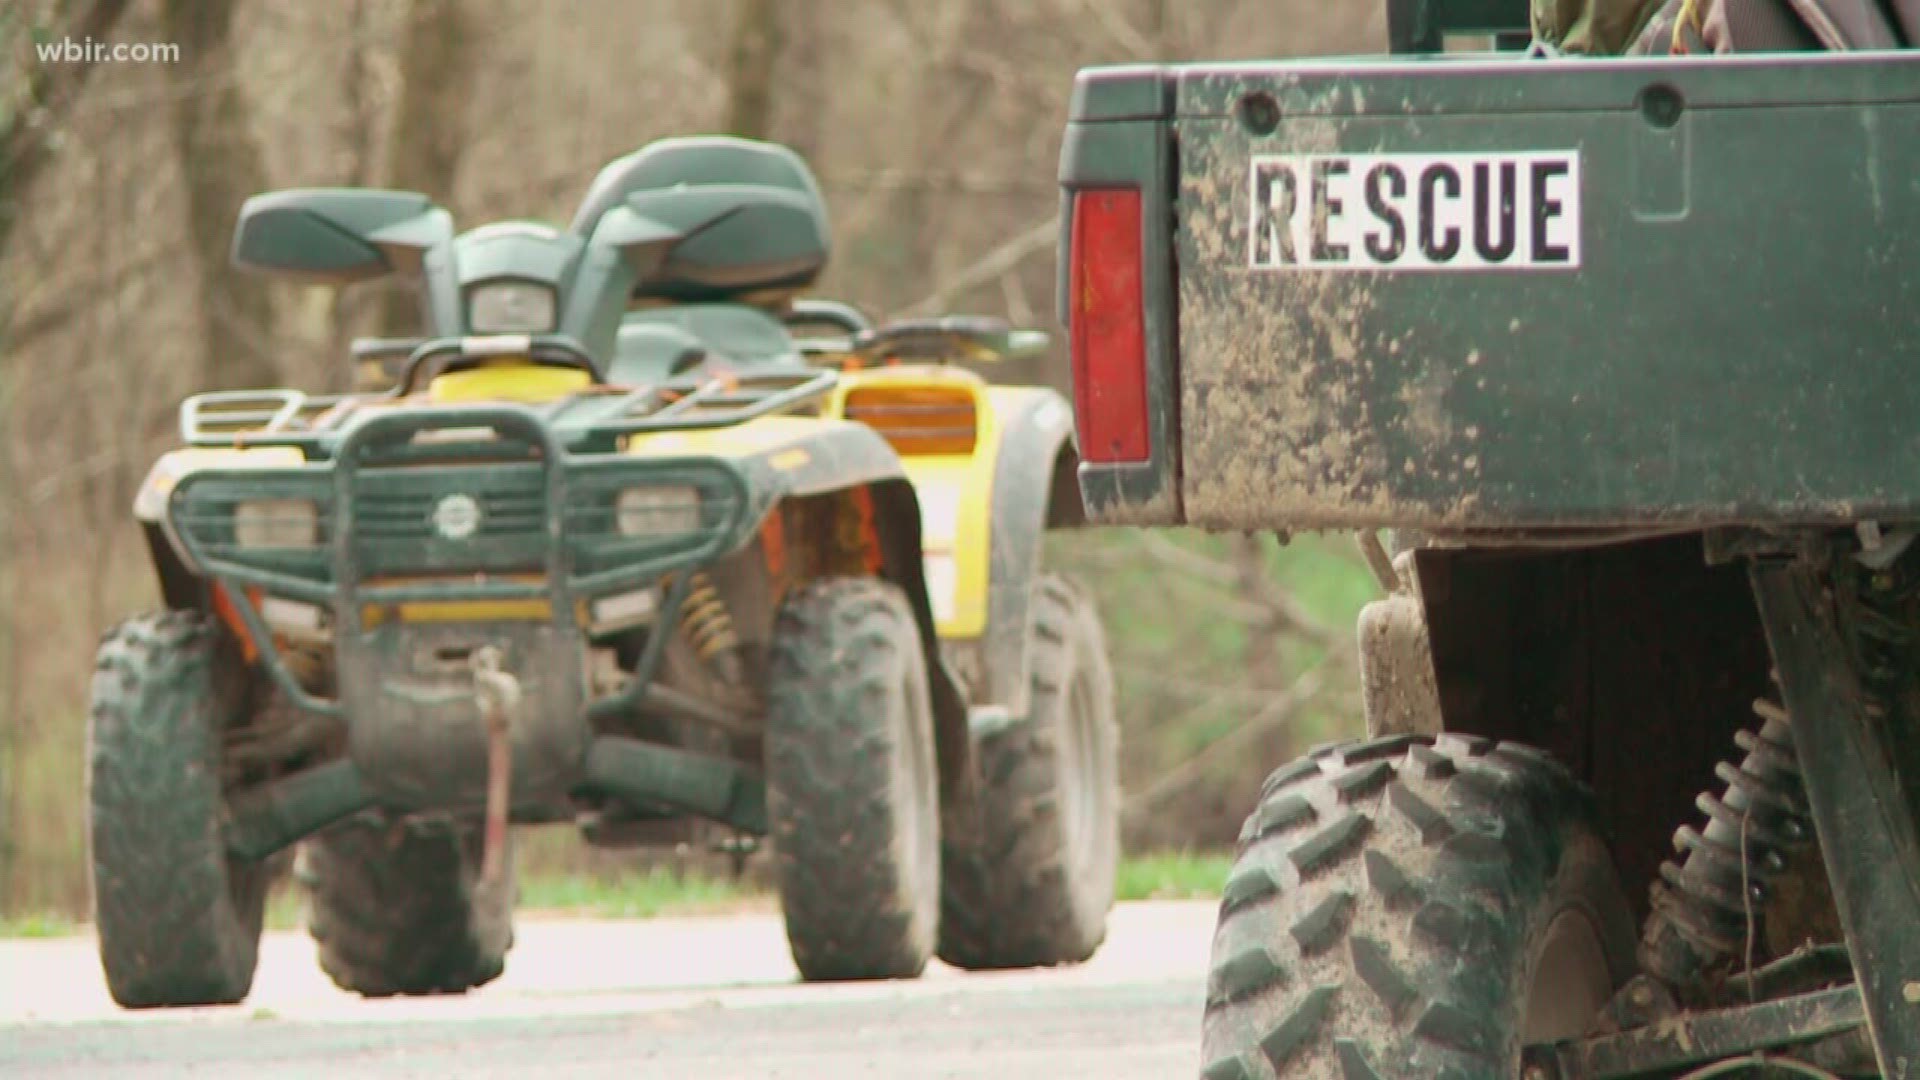 After four days of searching, rescue squads will no longer continue searching for Kevin Hamby in Morgan County.